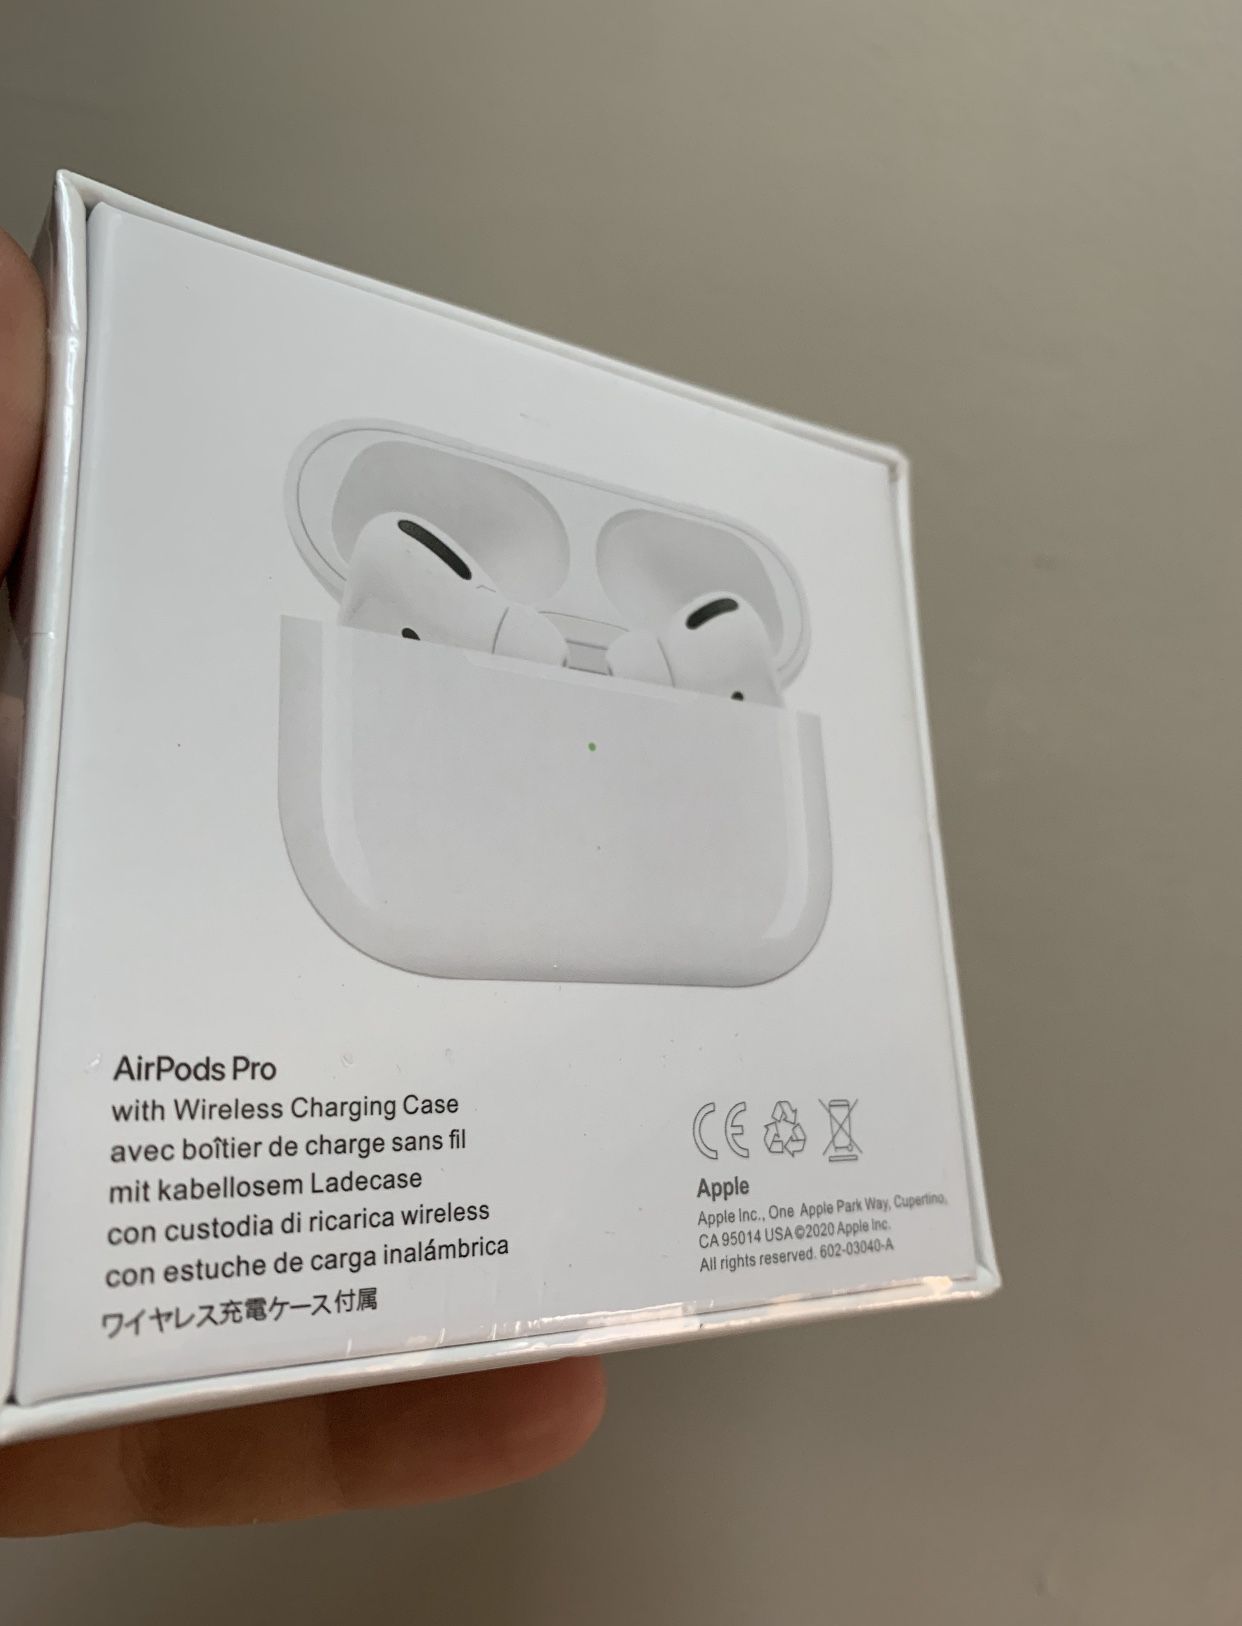 Apple AirPods Pro Black Friday Sale!